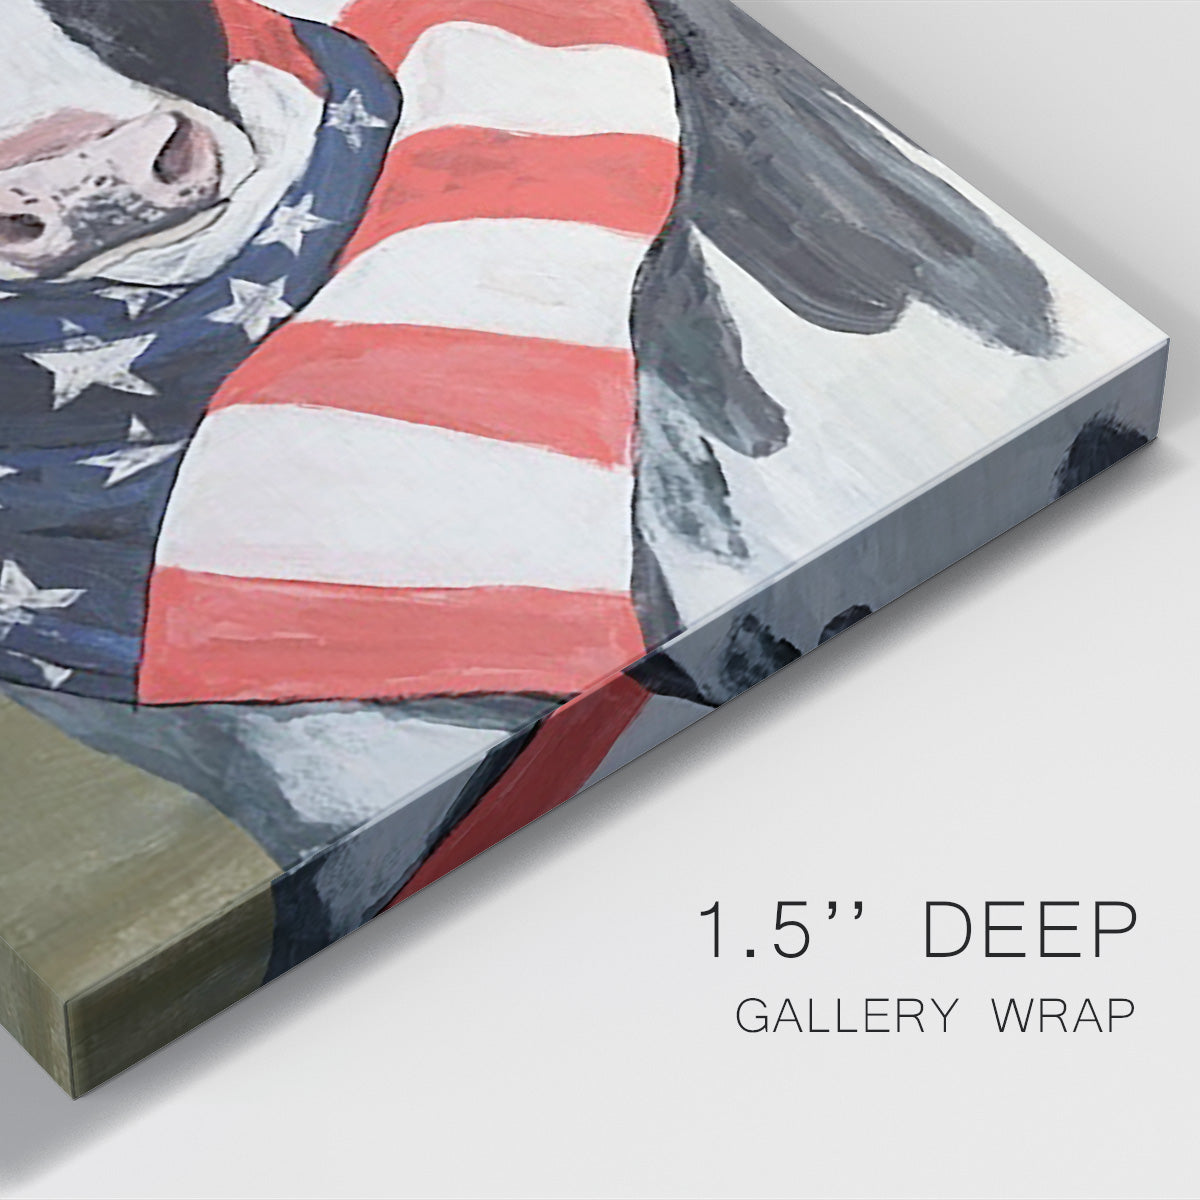 American Cow I Premium Gallery Wrapped Canvas - Ready to Hang